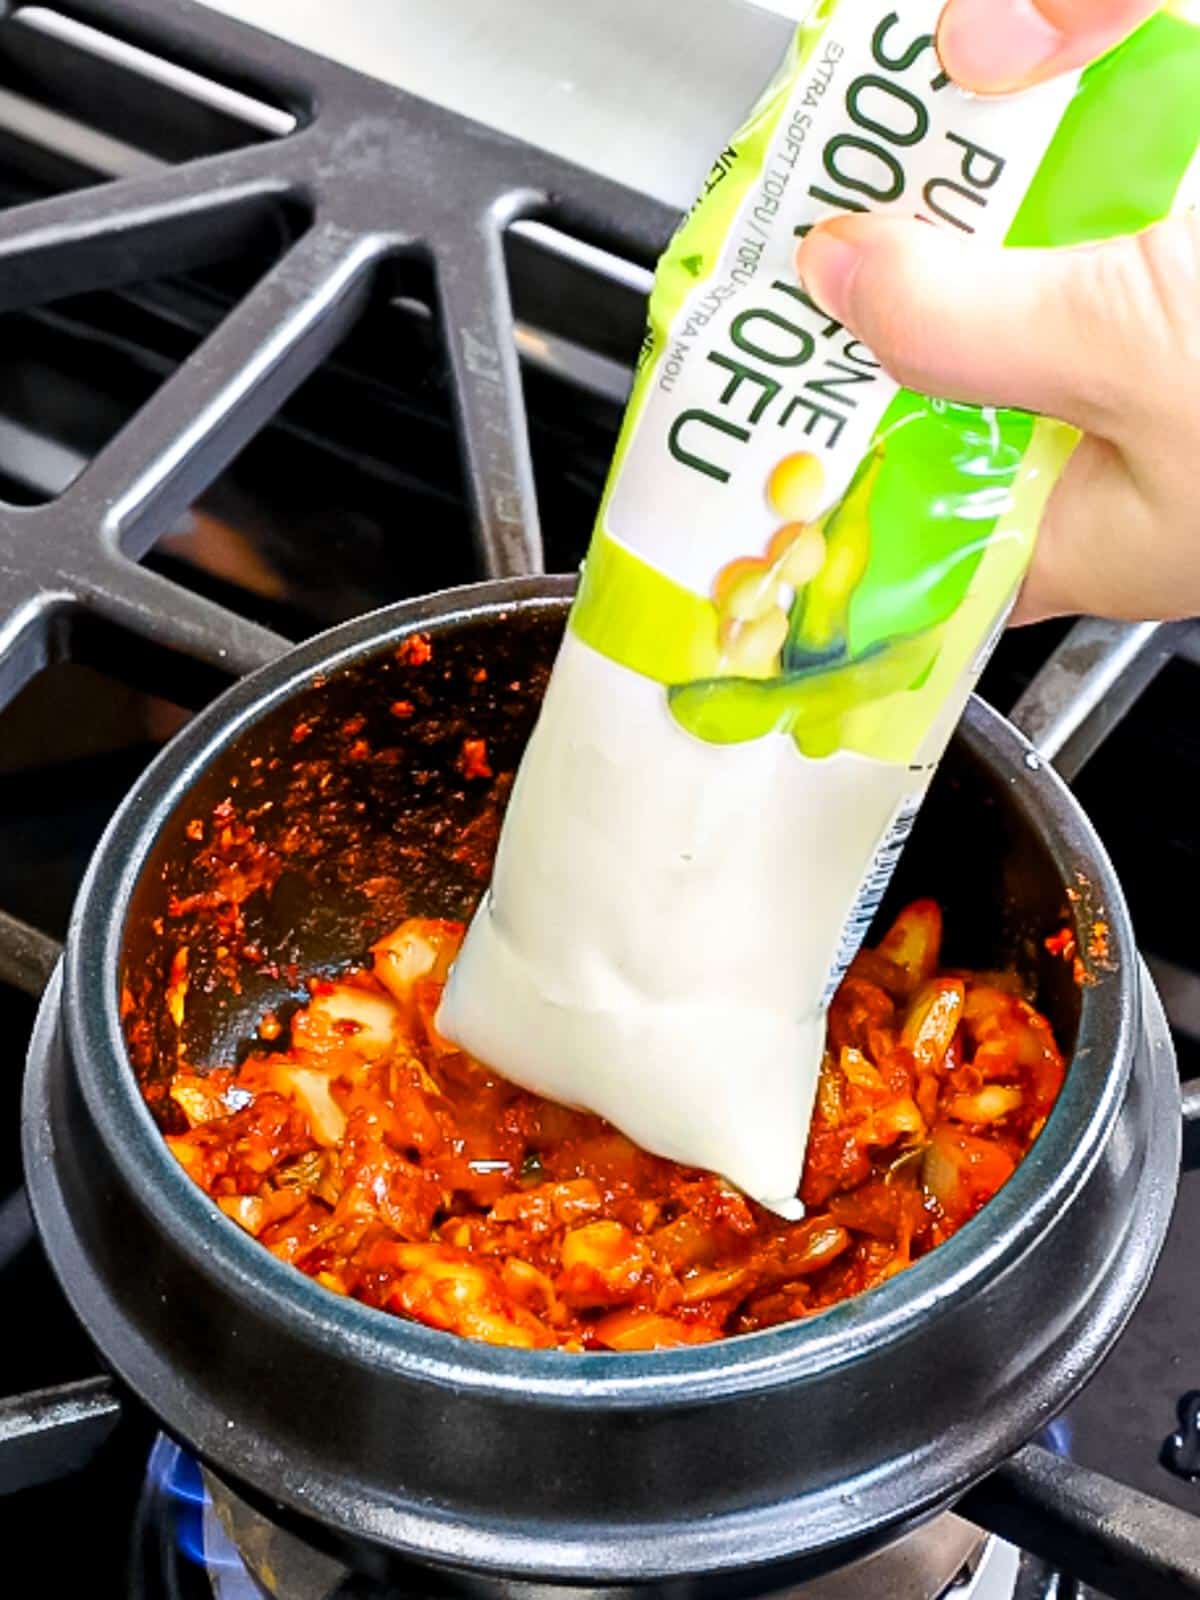 Korean soft tofu being added to kimchi in an earthenware pot.